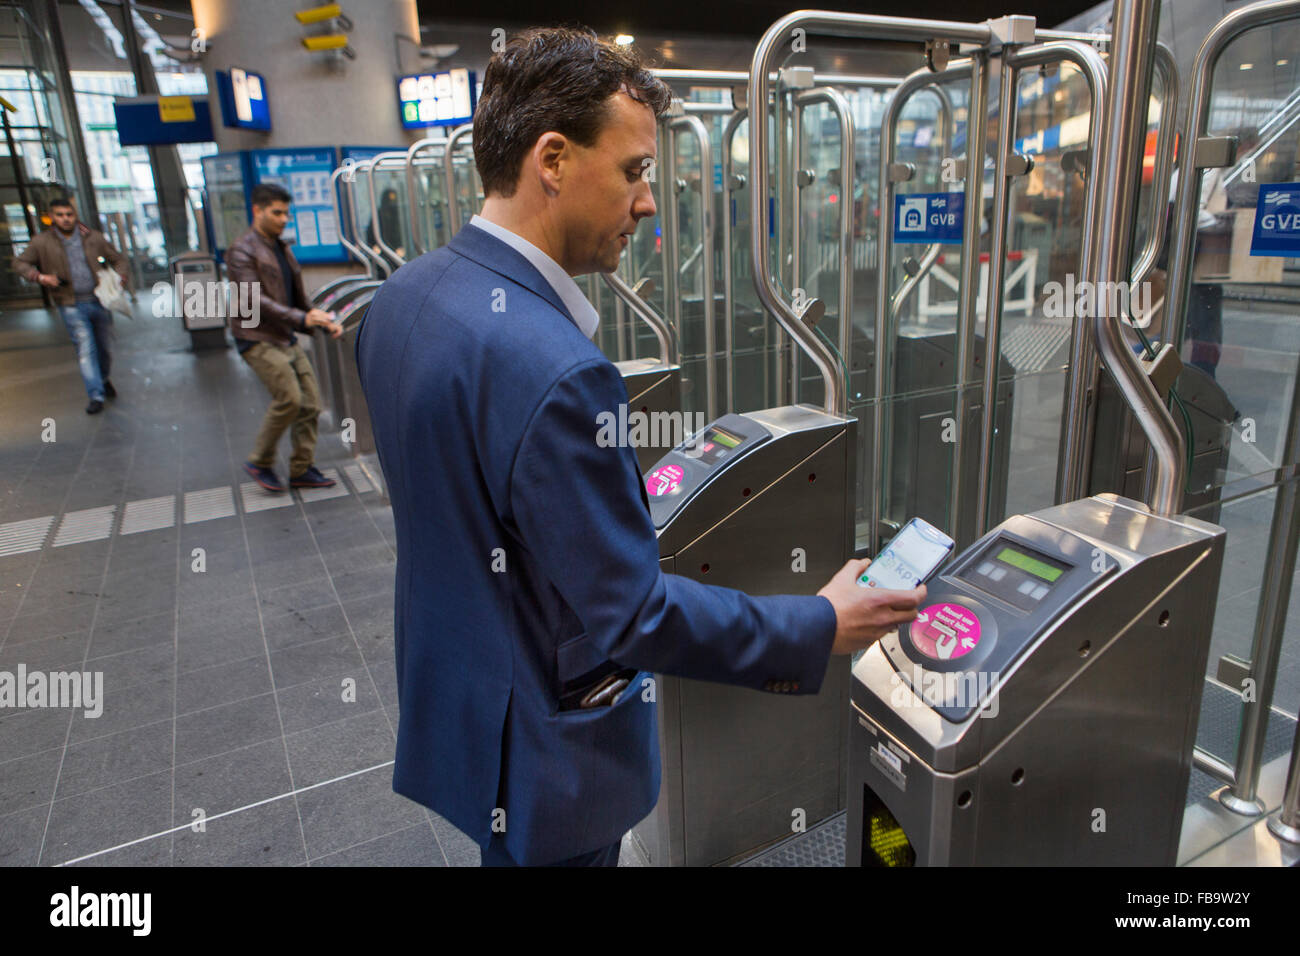 All Dutch transport companies started in collaboration with telephone companies (Vodafone and KNP) an experiment in which commuters can  check in and out by mobile phone on public transport. Stock Photo